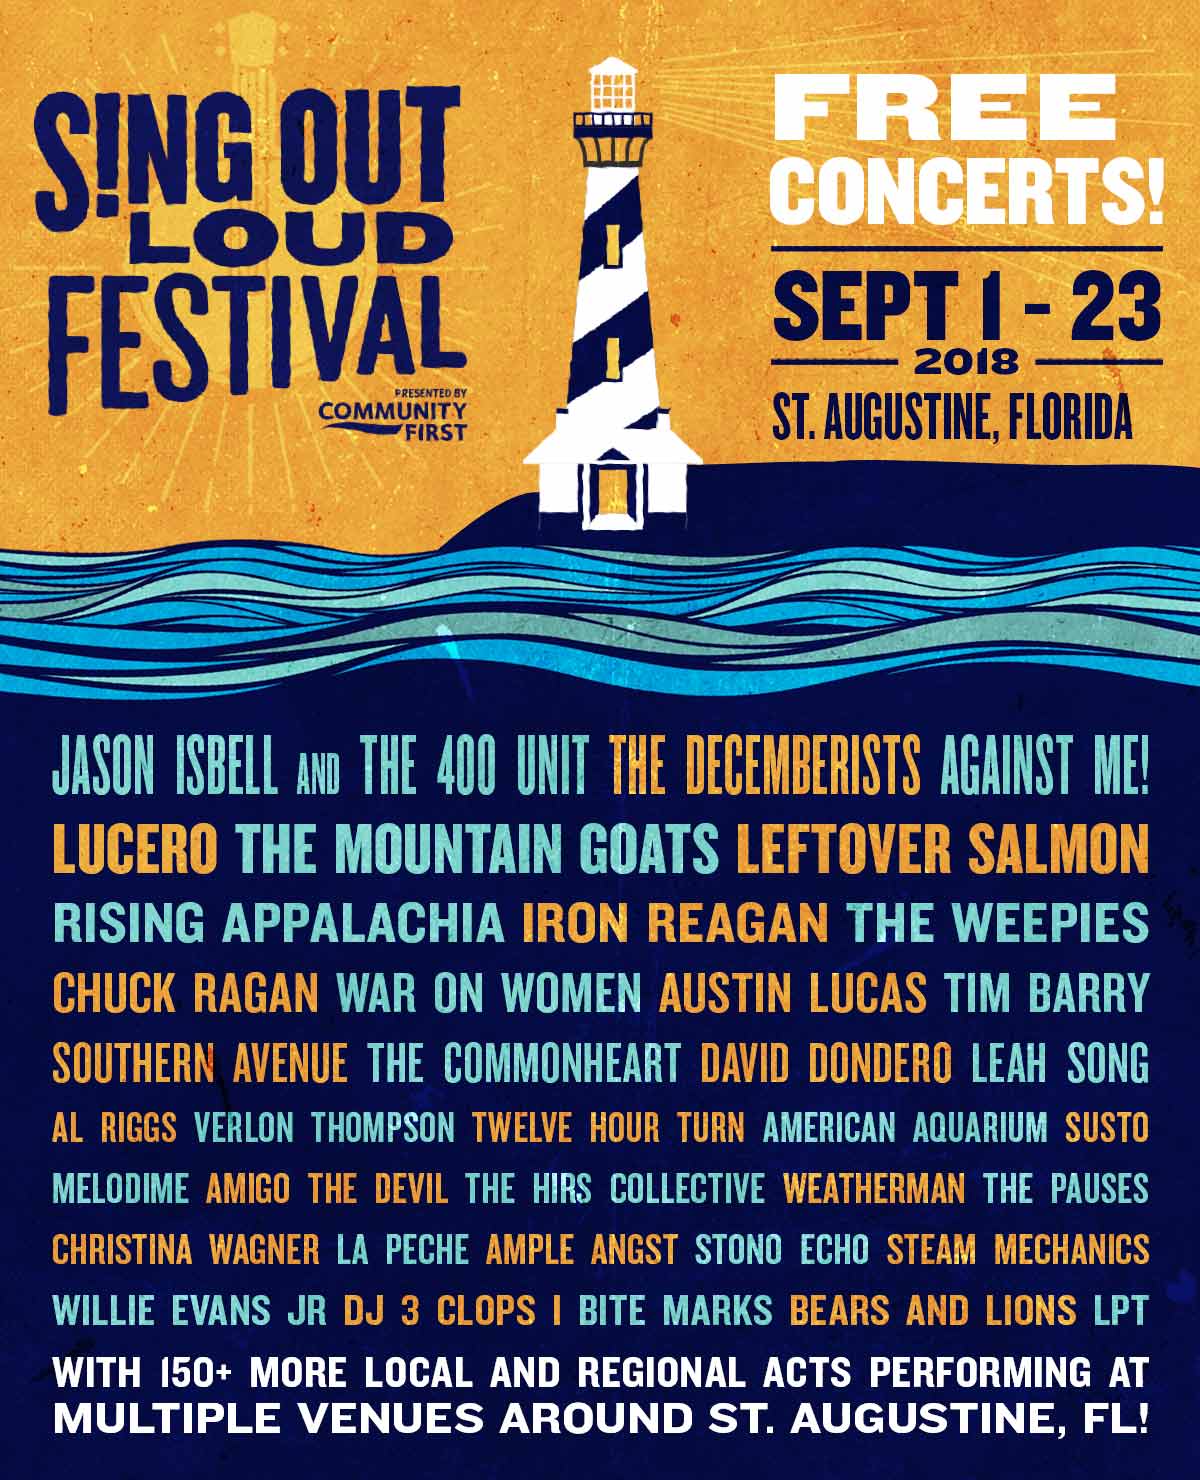 Sing Out Loud Festival of Music Makes for a Free and Easy Season on